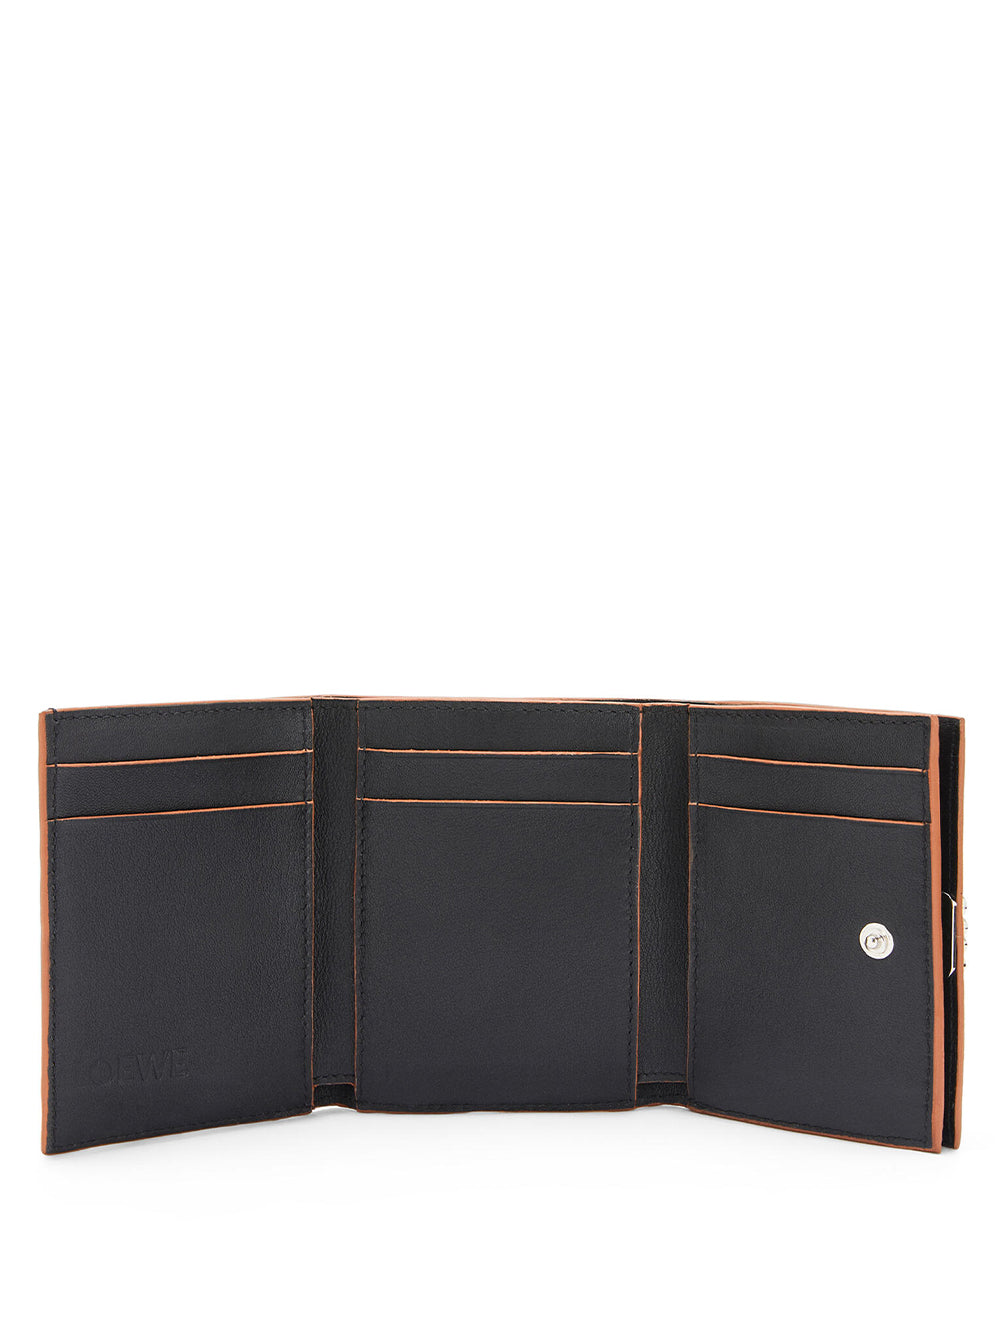 Anagram trifold wallet